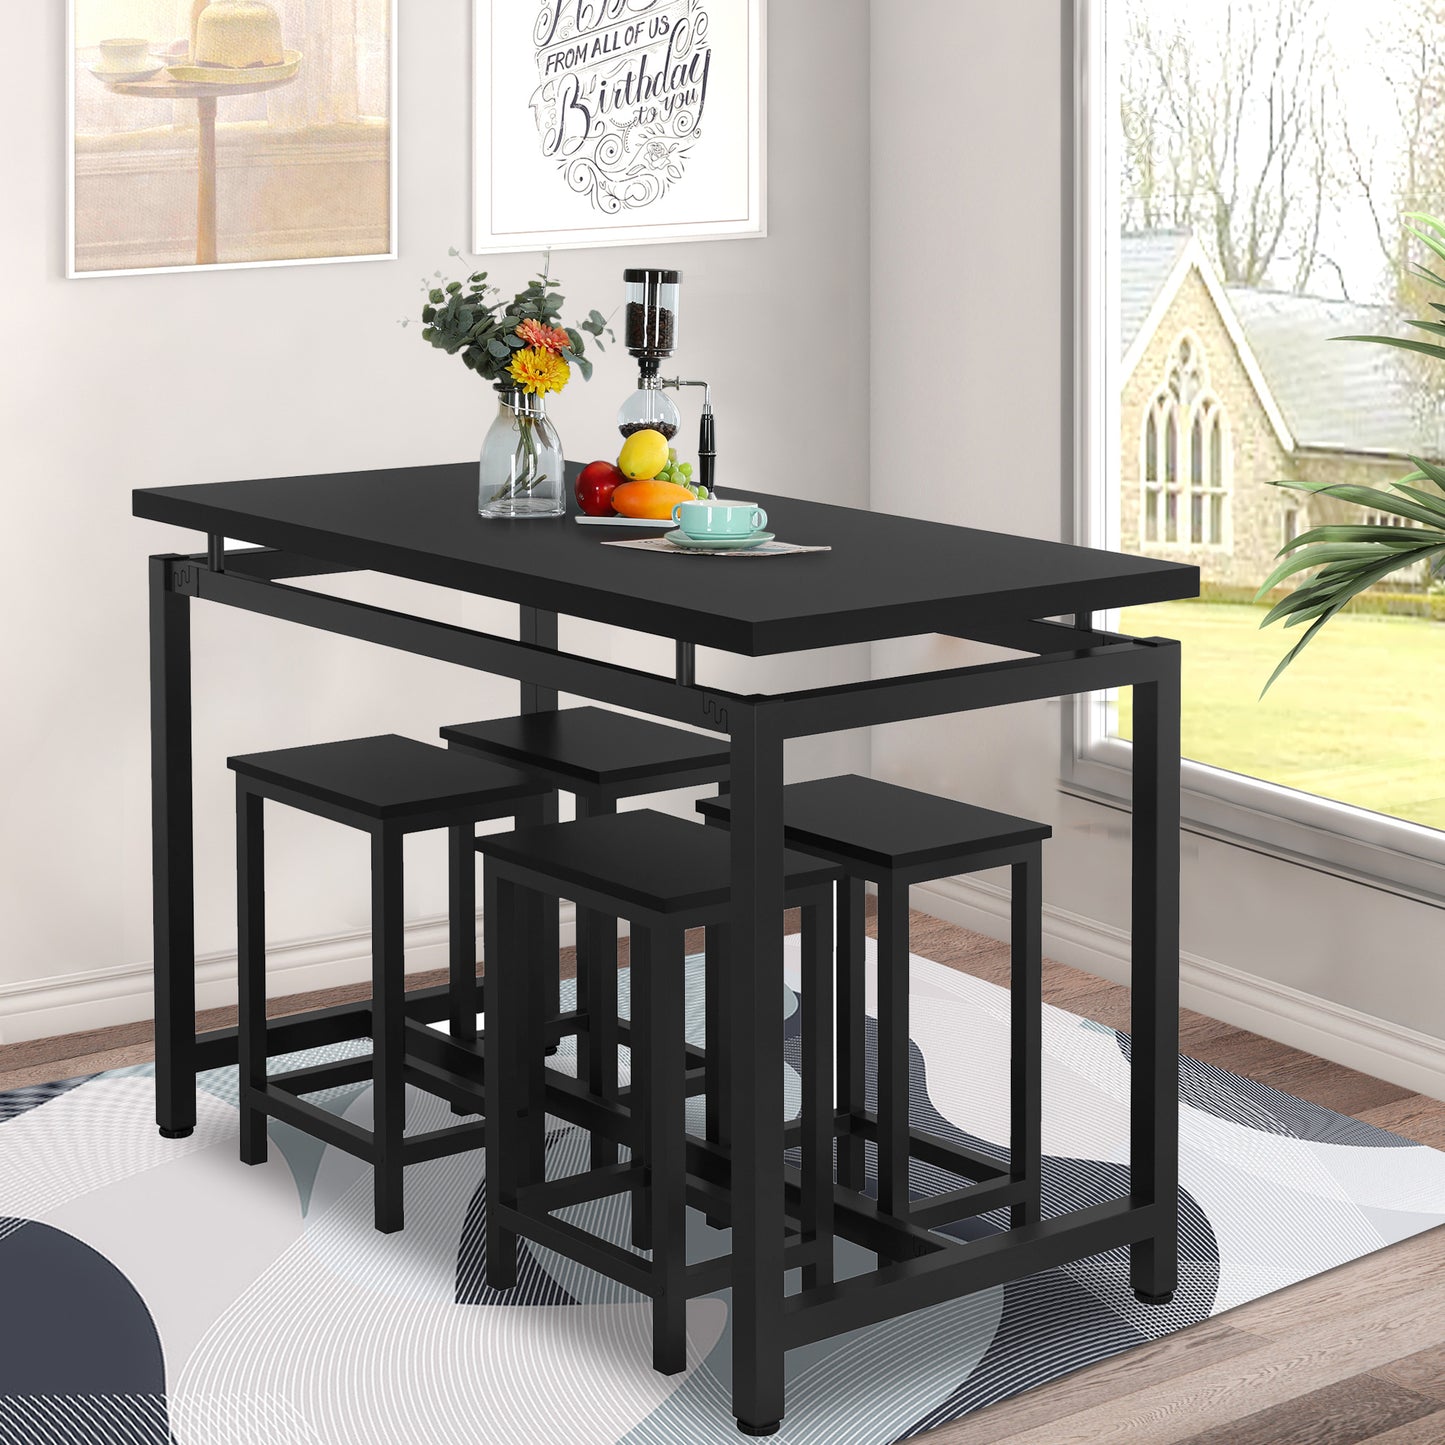 5 Piece Dining Table Set, Modern Pub Table Set with 4 Stools, Counter Height Bar Table Set, 4-Person Home Dining Table and Stools Set, Kitchen Table Set for Breakfast, Black, D6637